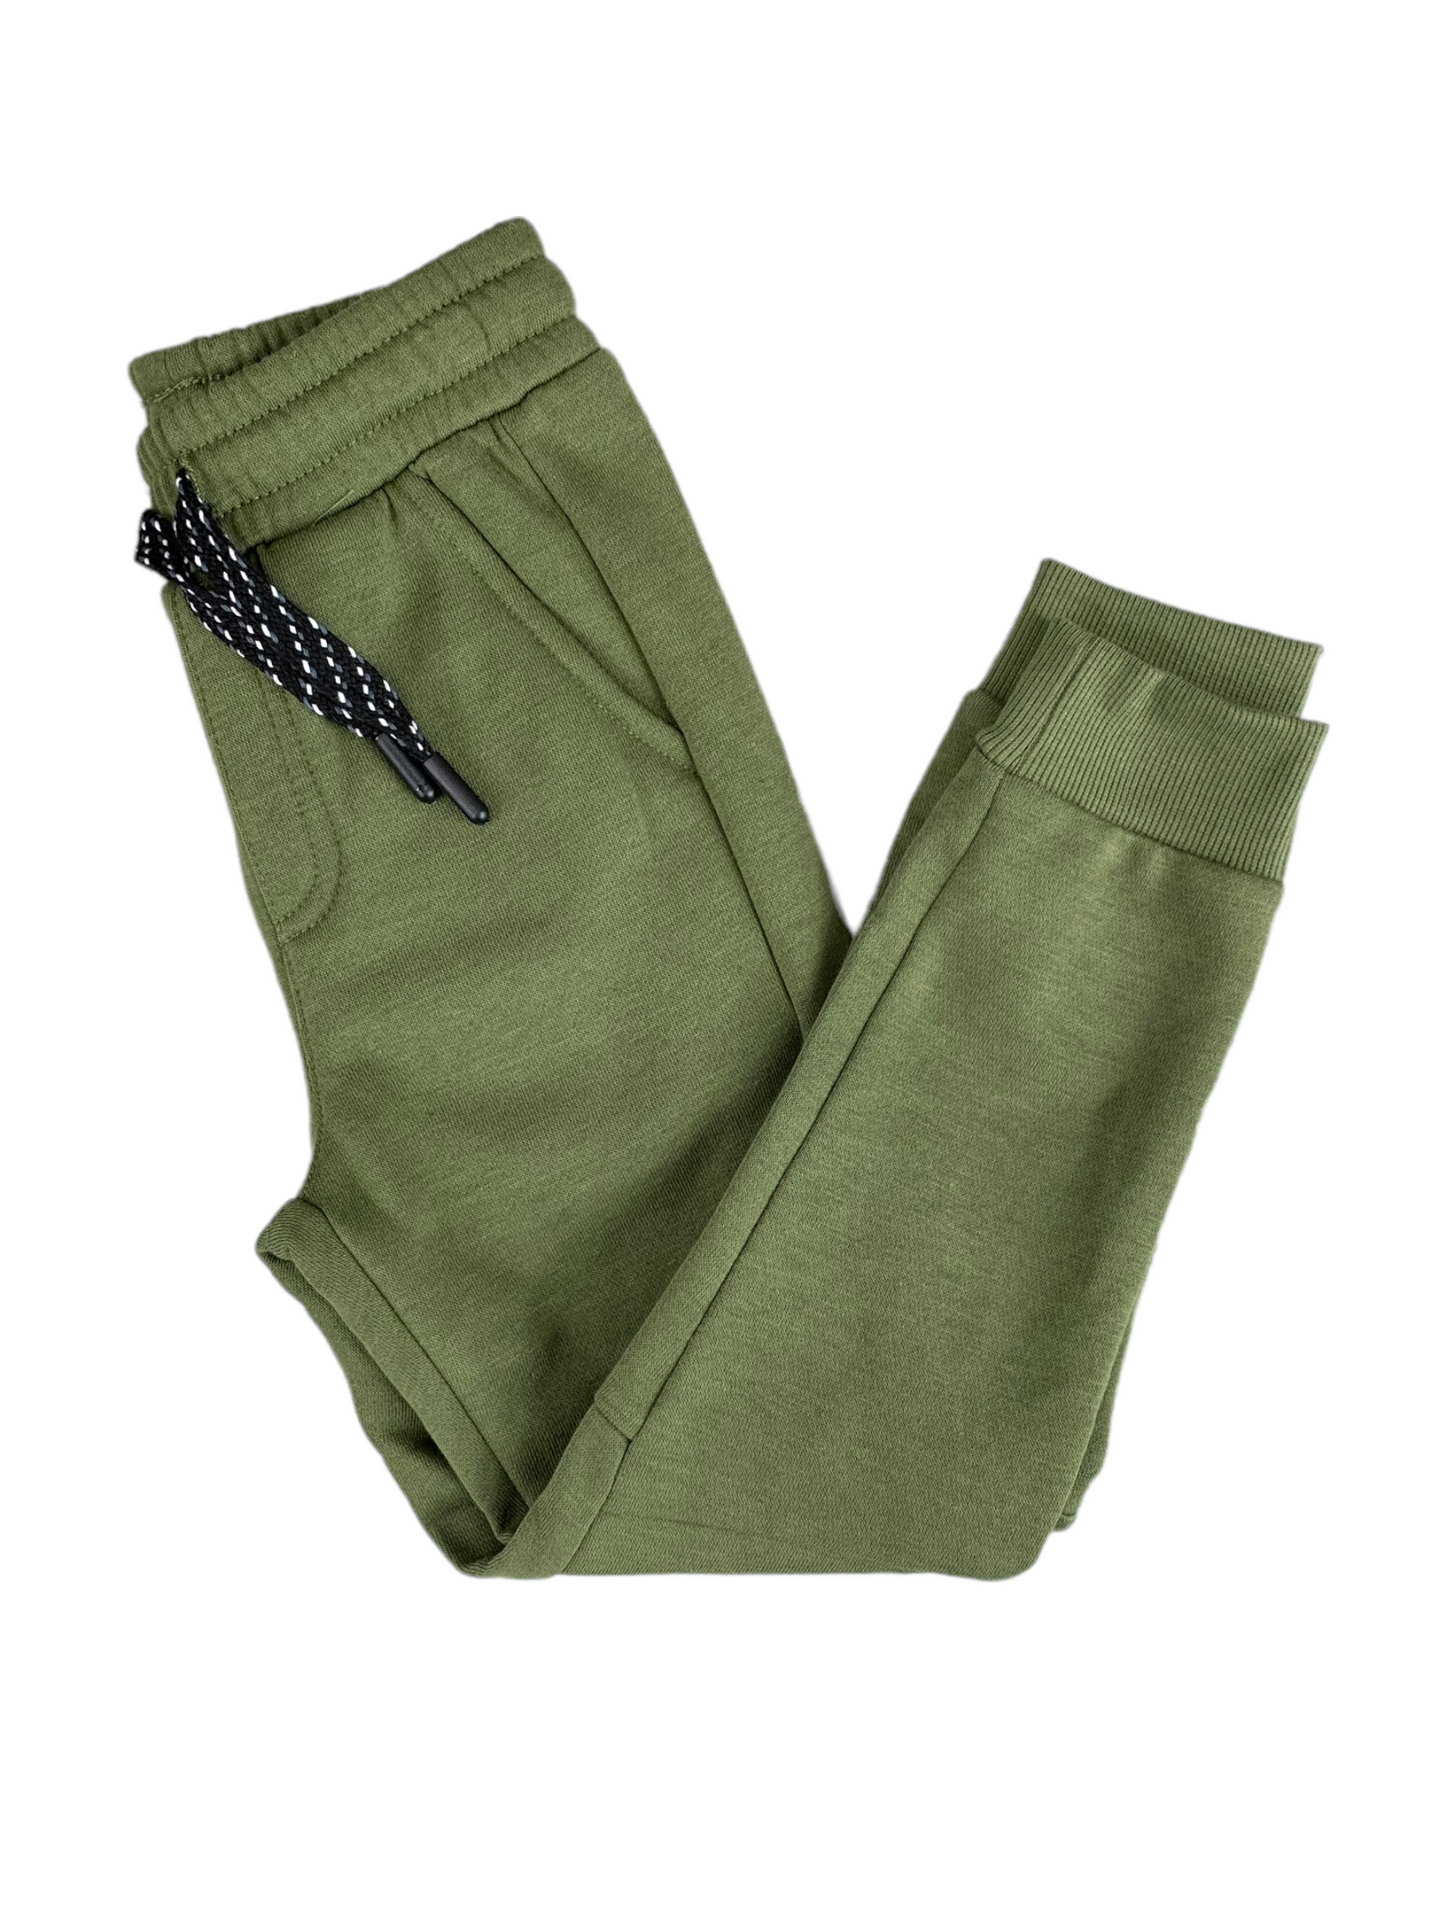 Khaki green joggers for boys 2 to 7 years